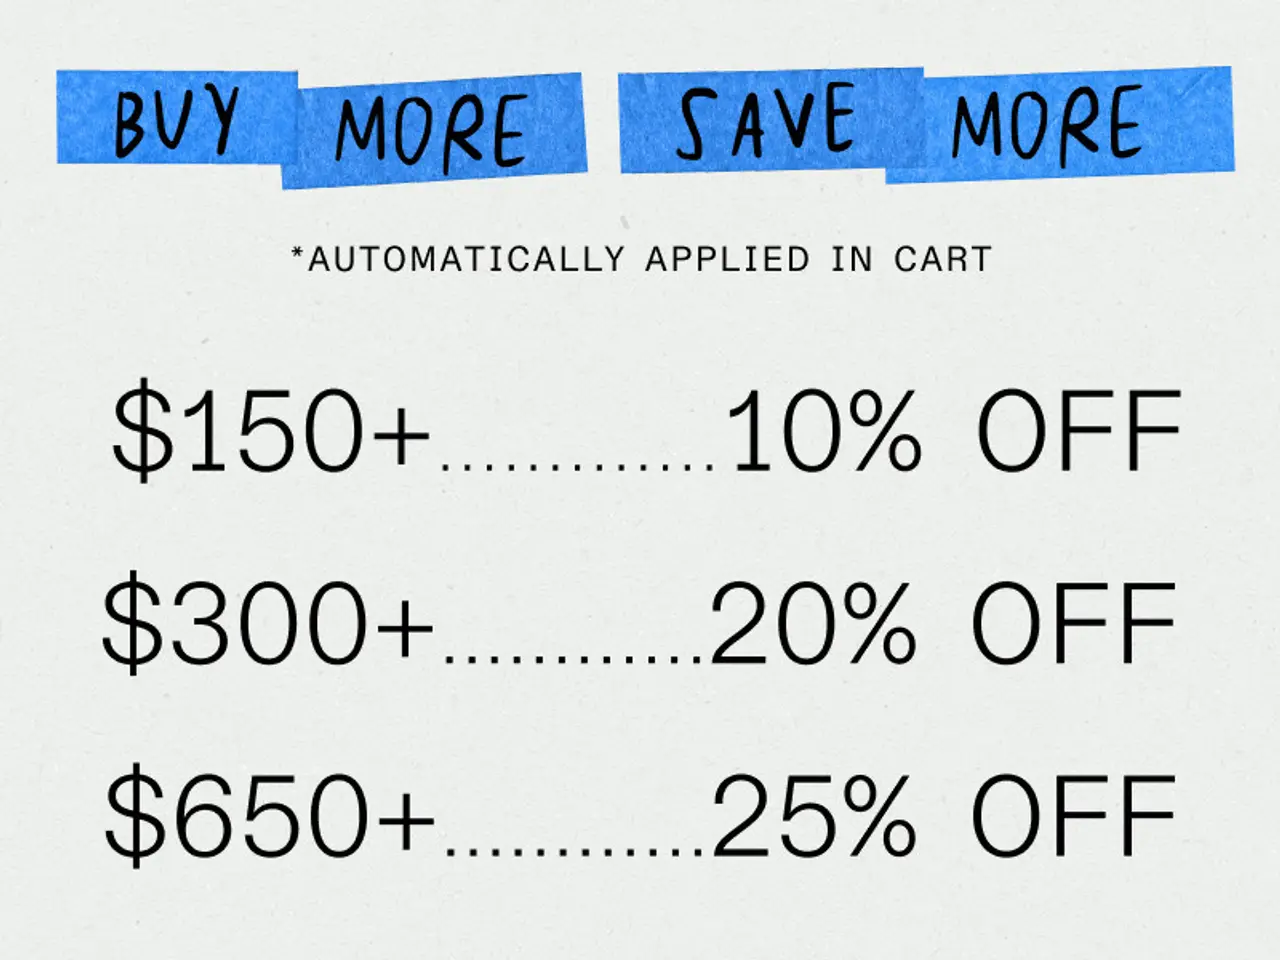 A promotional graphic details a tiered discount offer with increasing percentages off for higher spending thresholds, stating the discount is automatically applied in the cart.